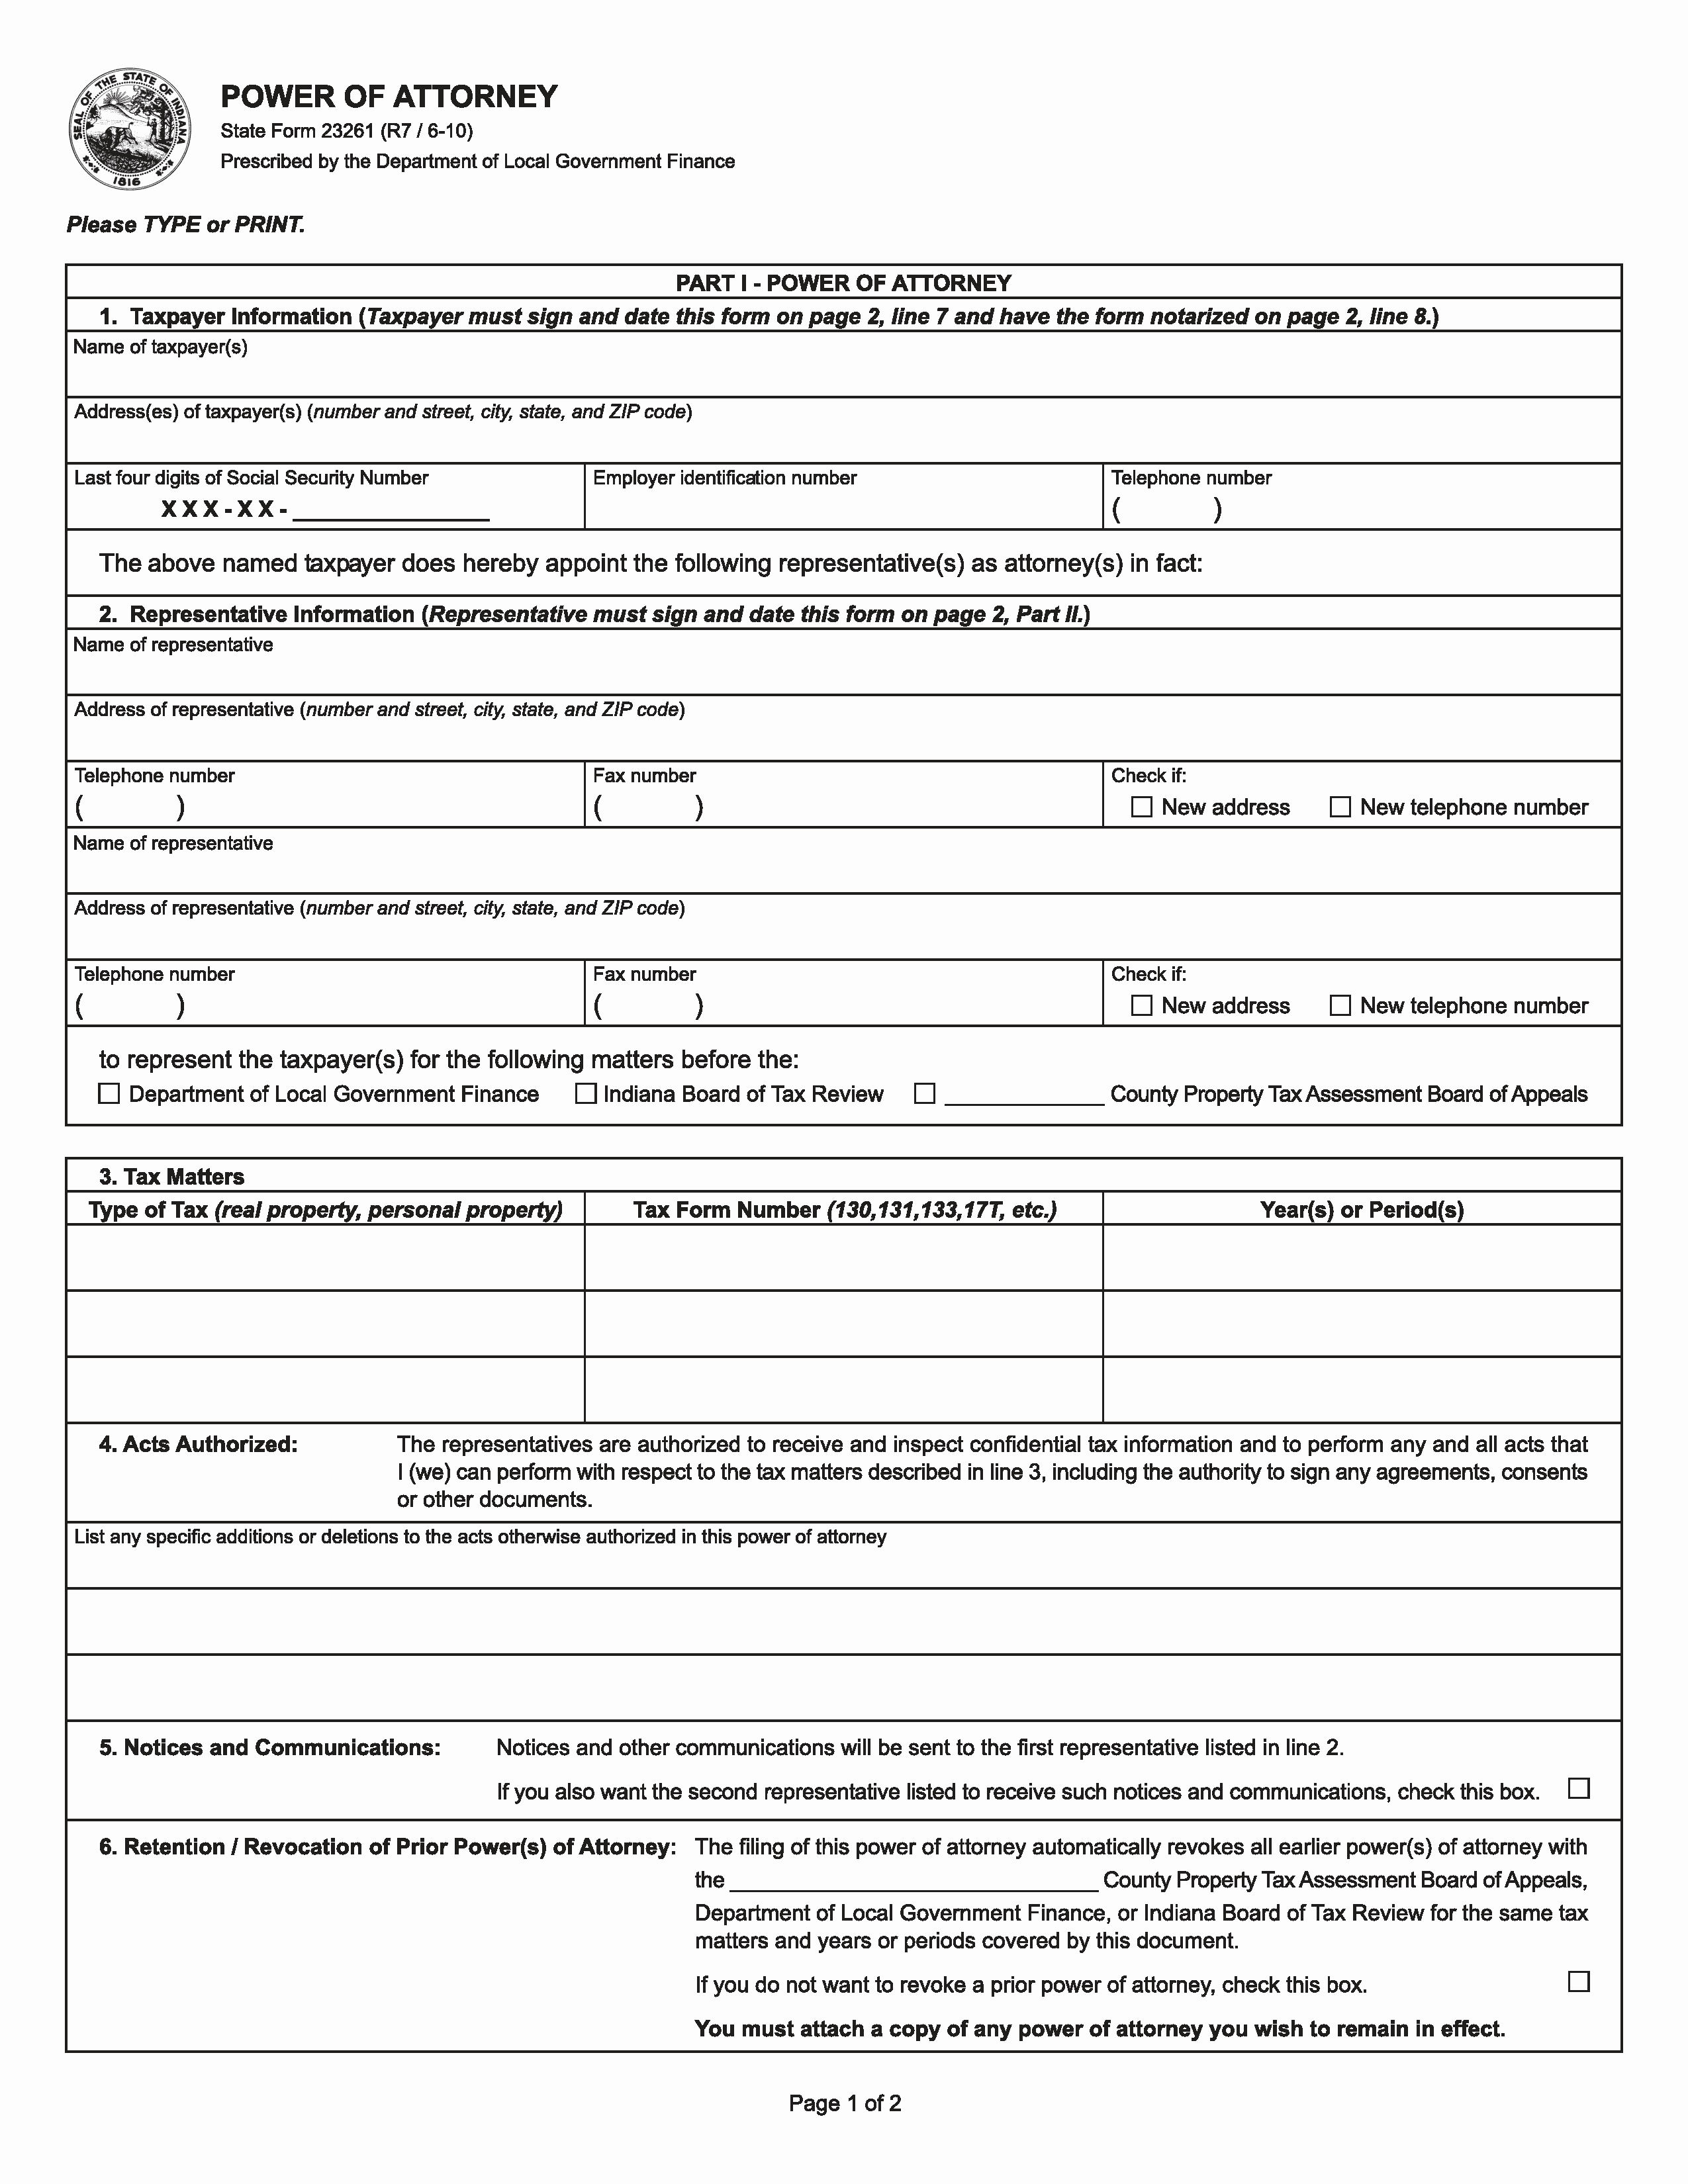 Free Indiana Tax Power Of Attorney Form 23261 R7 6 10 